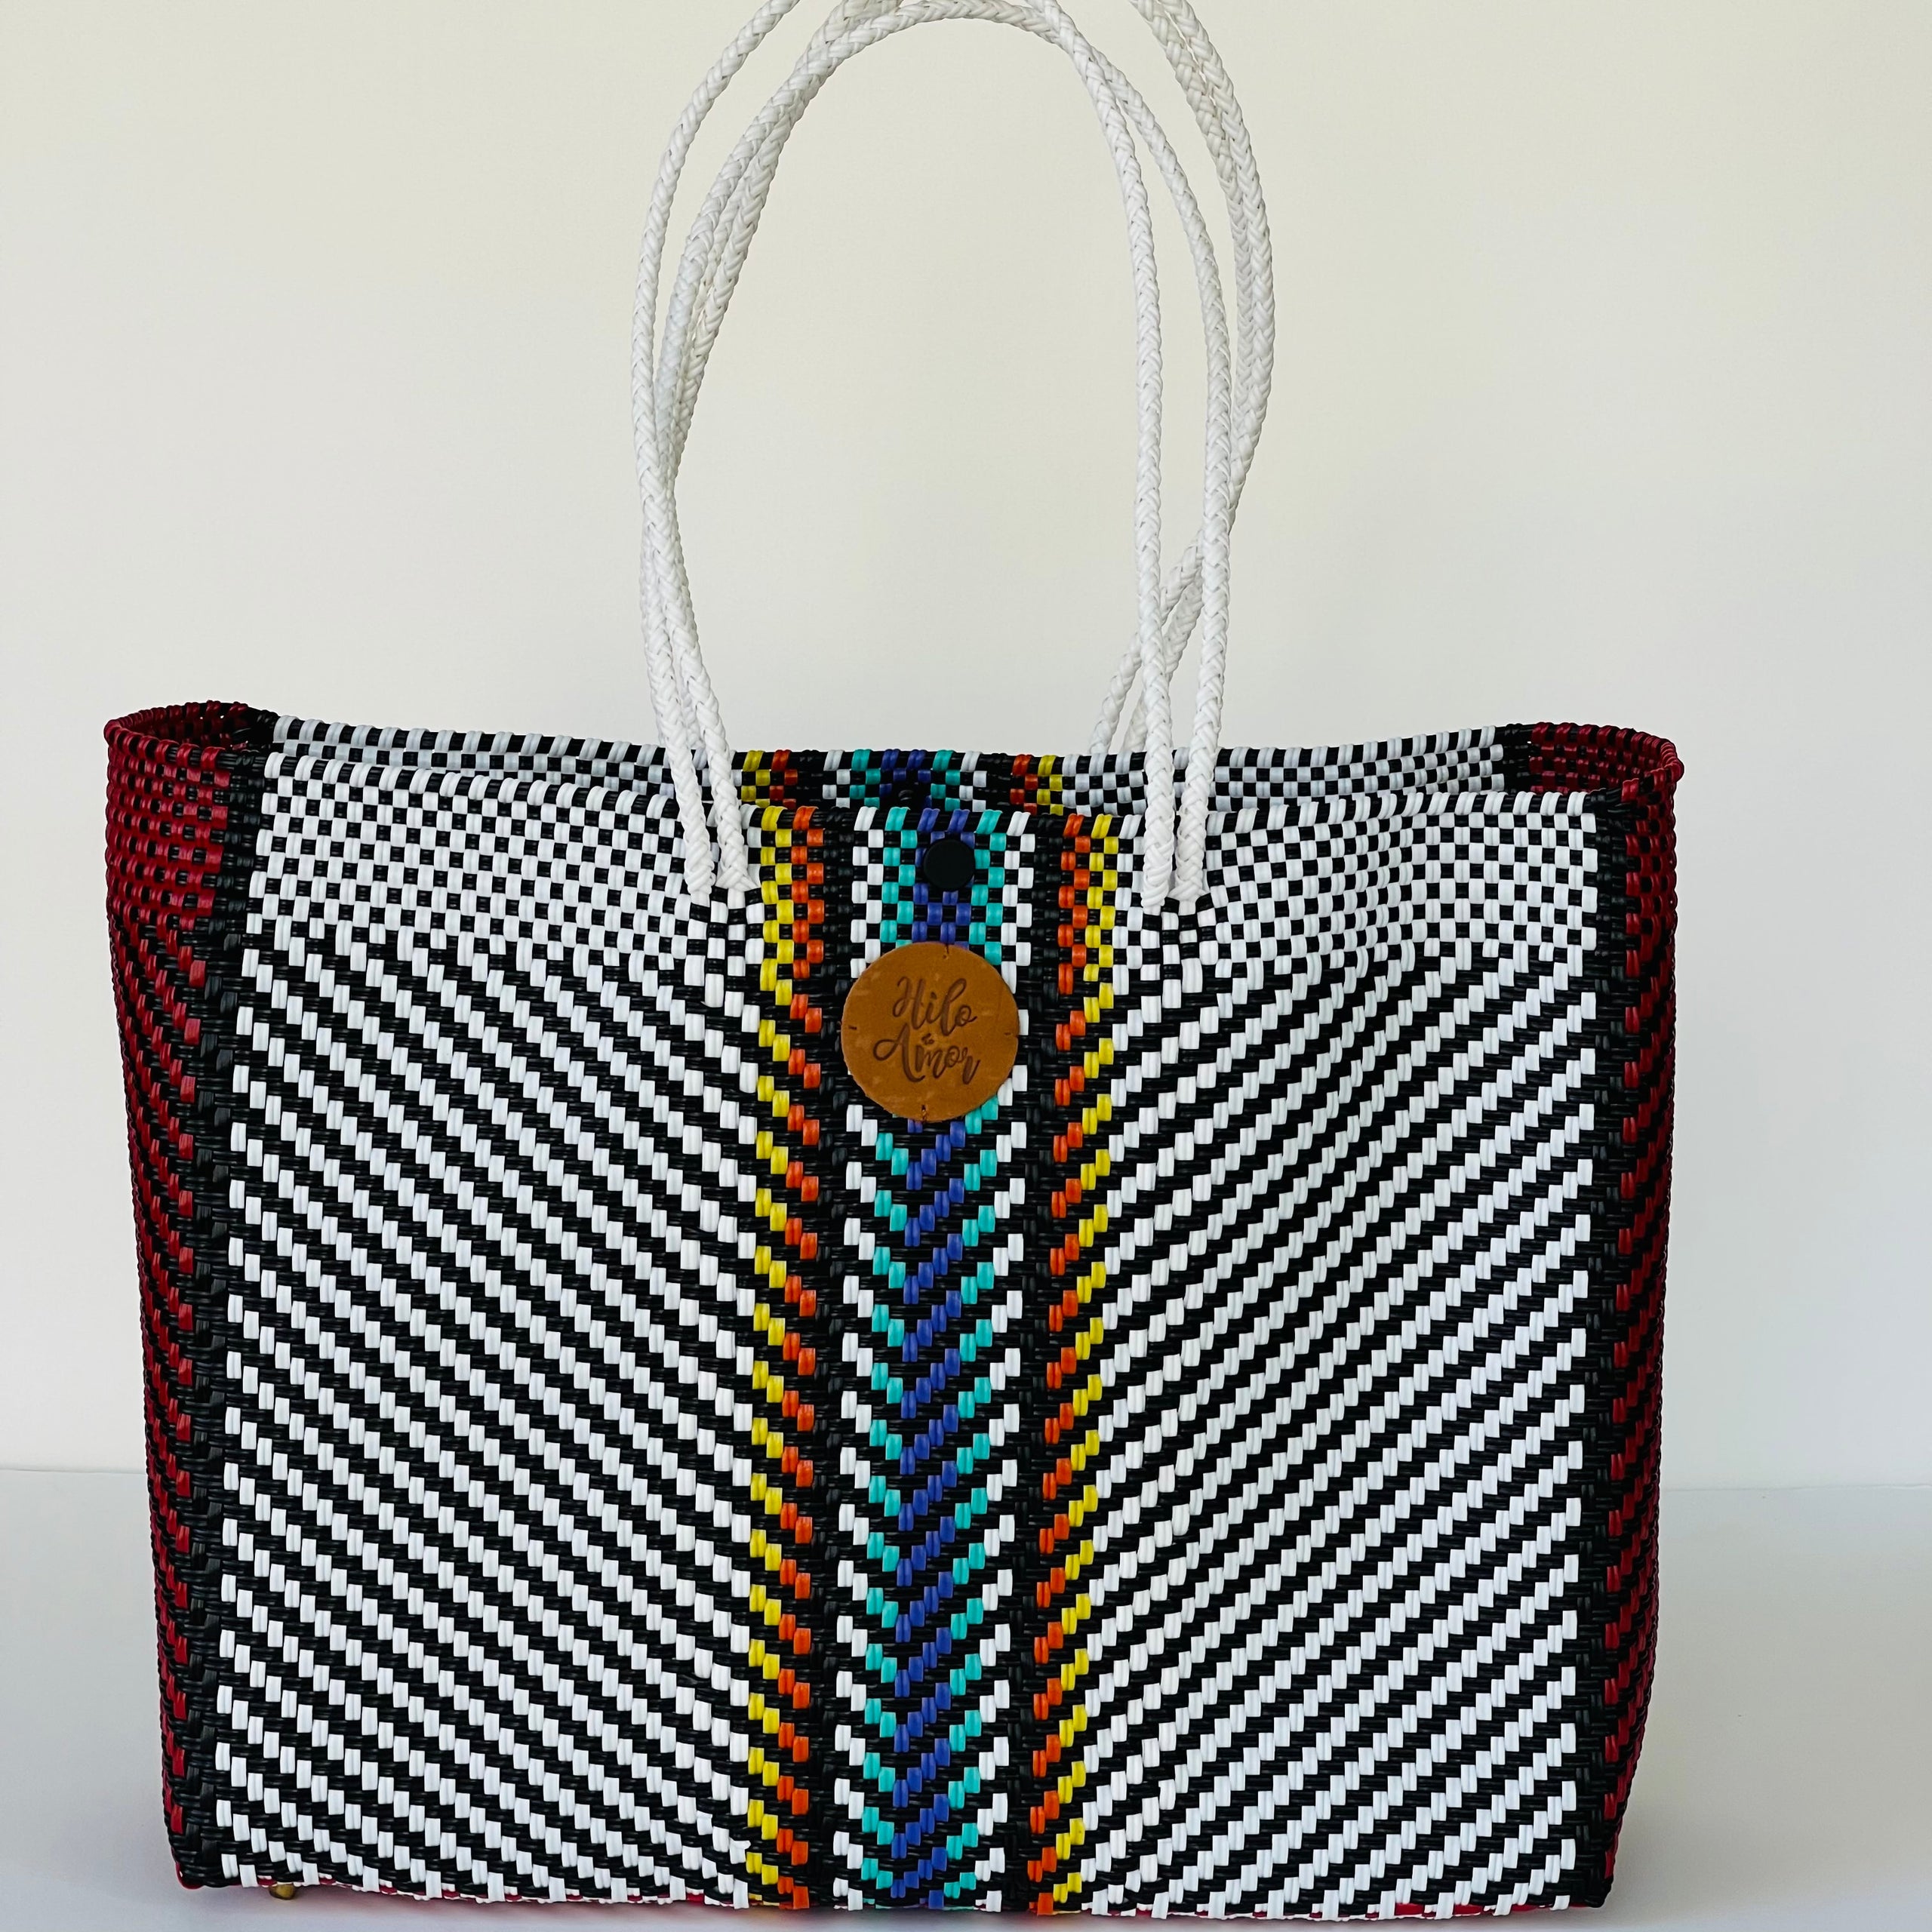 Small Handwoven Recycled Plastic Open Tote Bag – Keepin' Breezy